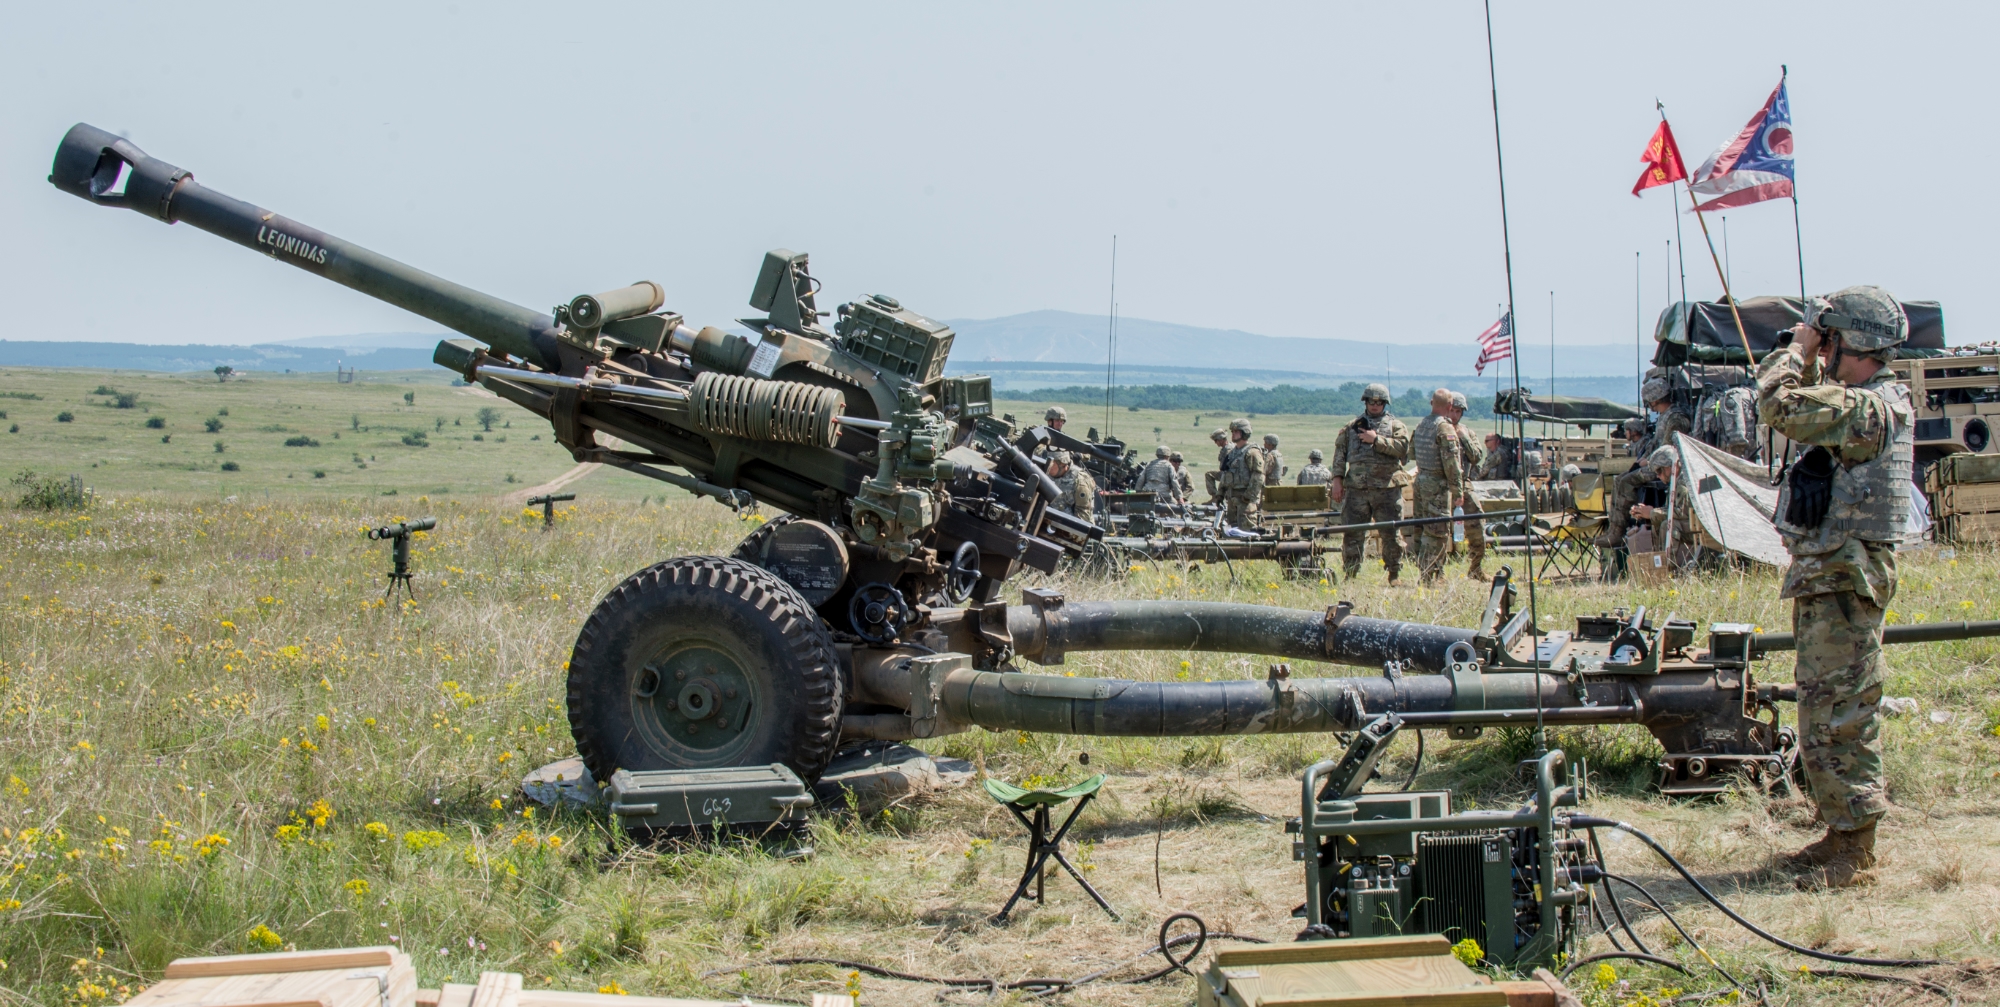 Ukrainian soldiers learn to use American M119A3 howitzers, the most modern version of the M119 with a digital fire control system